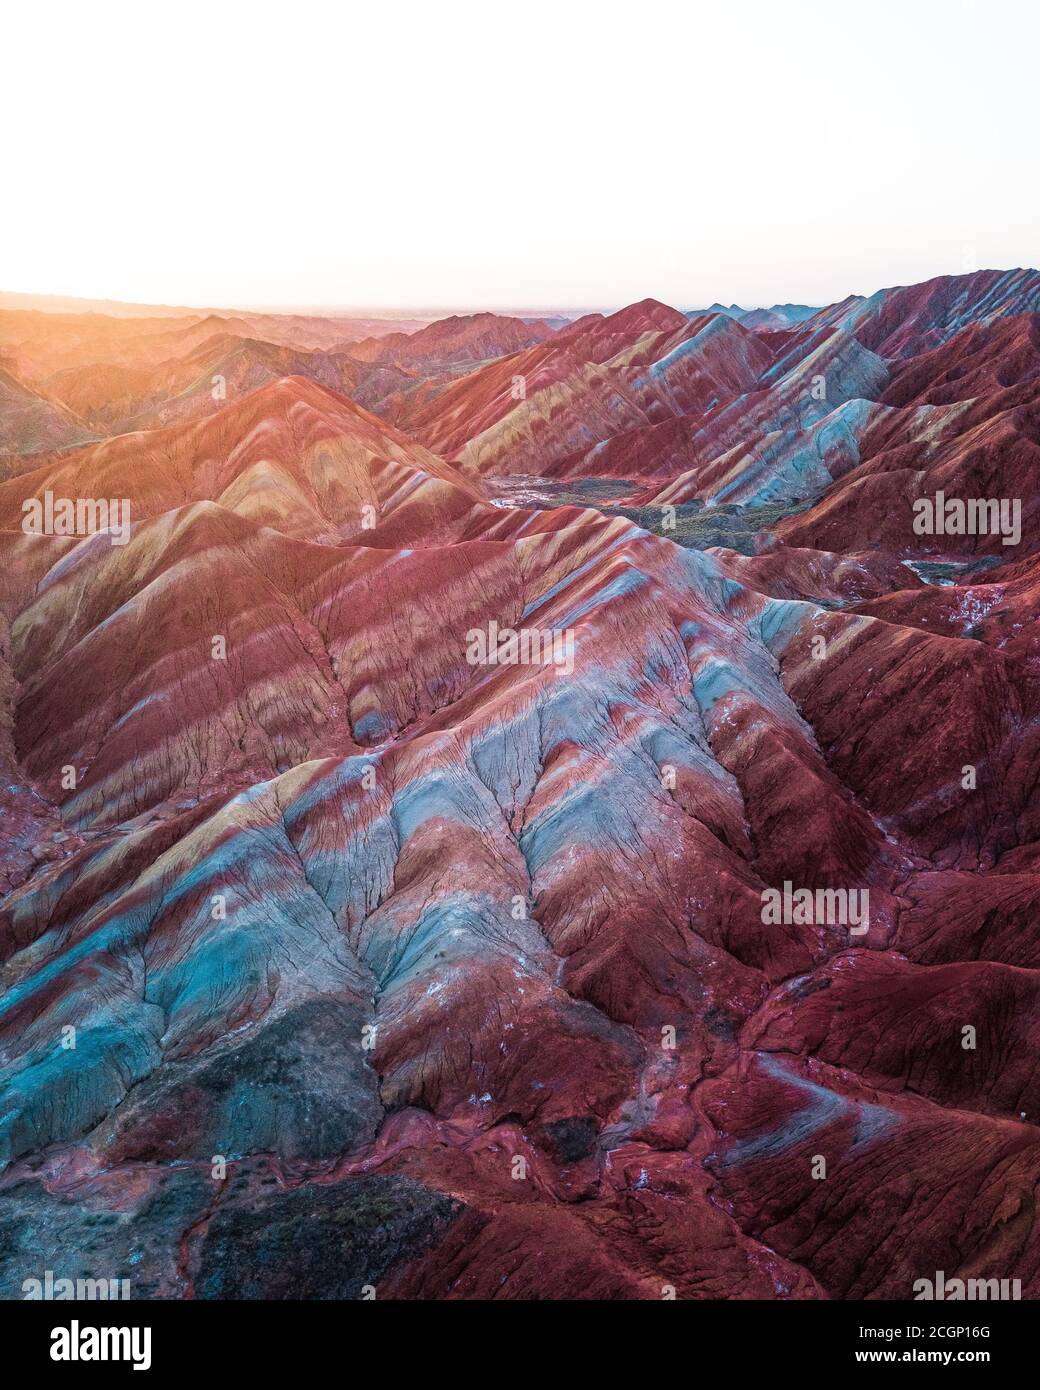 Red sandstone mountains of different minerals, Zhangye Danxia Geopark, China Stock Photo